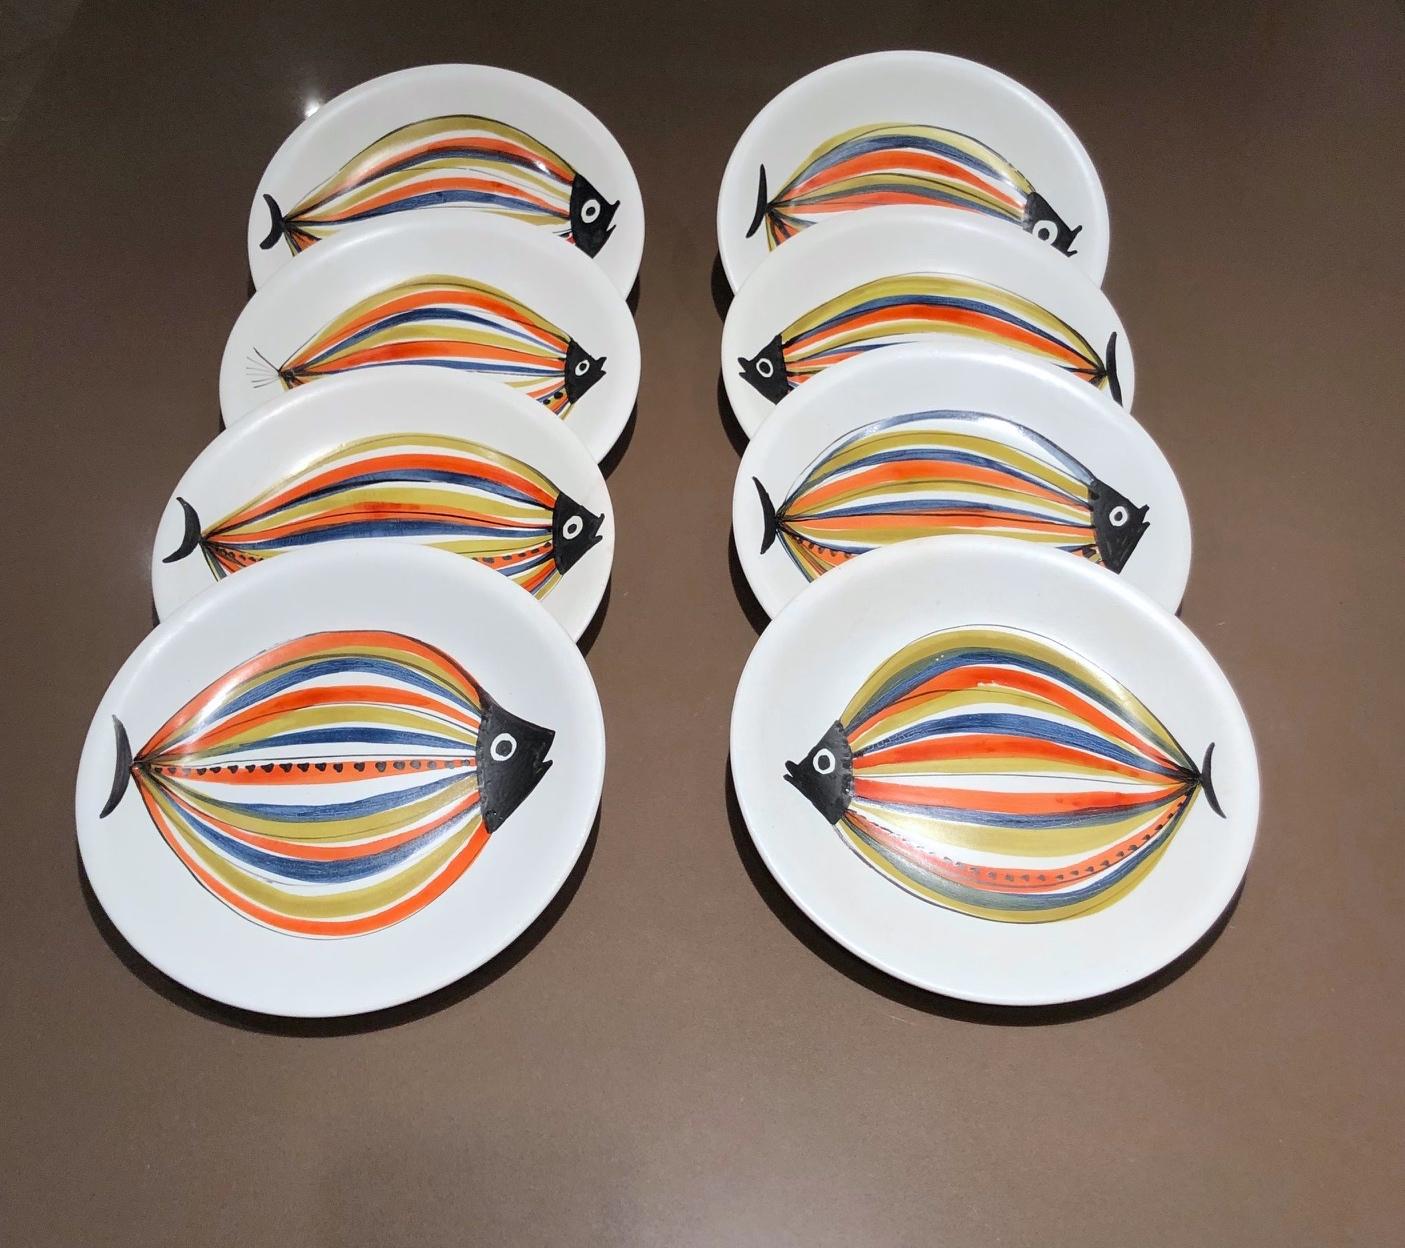 Roger Capron, (1922-2006)
Ceramic set of 8 plates (diameter 20 cm) with decorative fishes
As wall decoration or dinner plates
Signed Capron Vallauris on back
Manufactured, circa 1950.